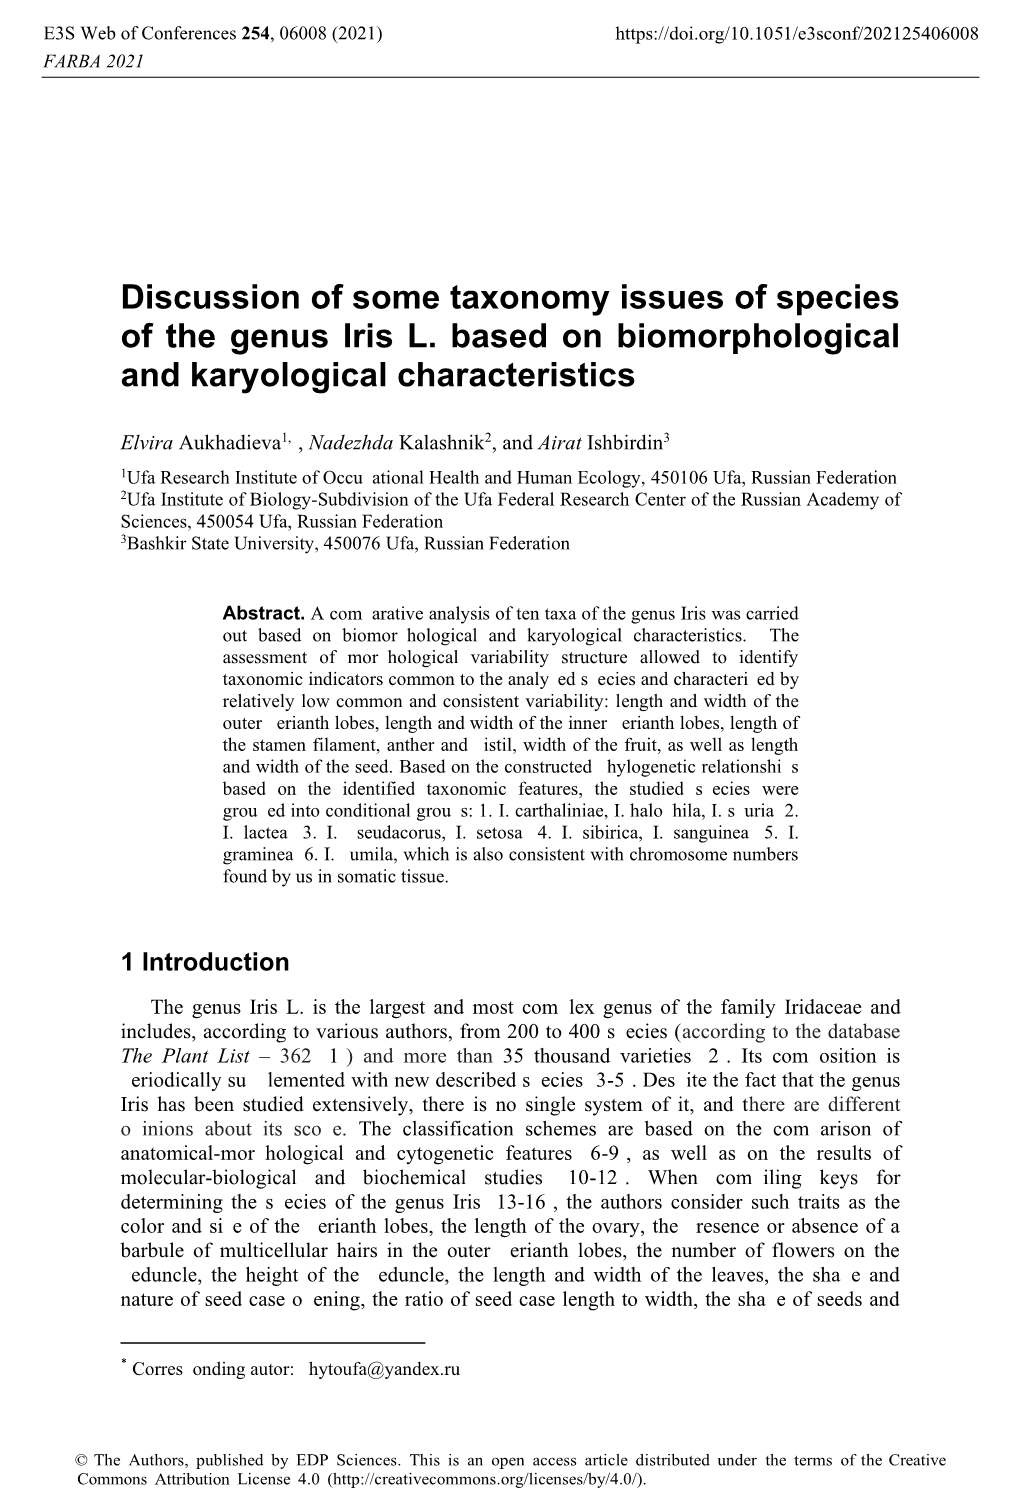 Discussion of Some Taxonomy Issues of Species of the Genus Iris L. Based on Biomorphological and Karyological Characteristics